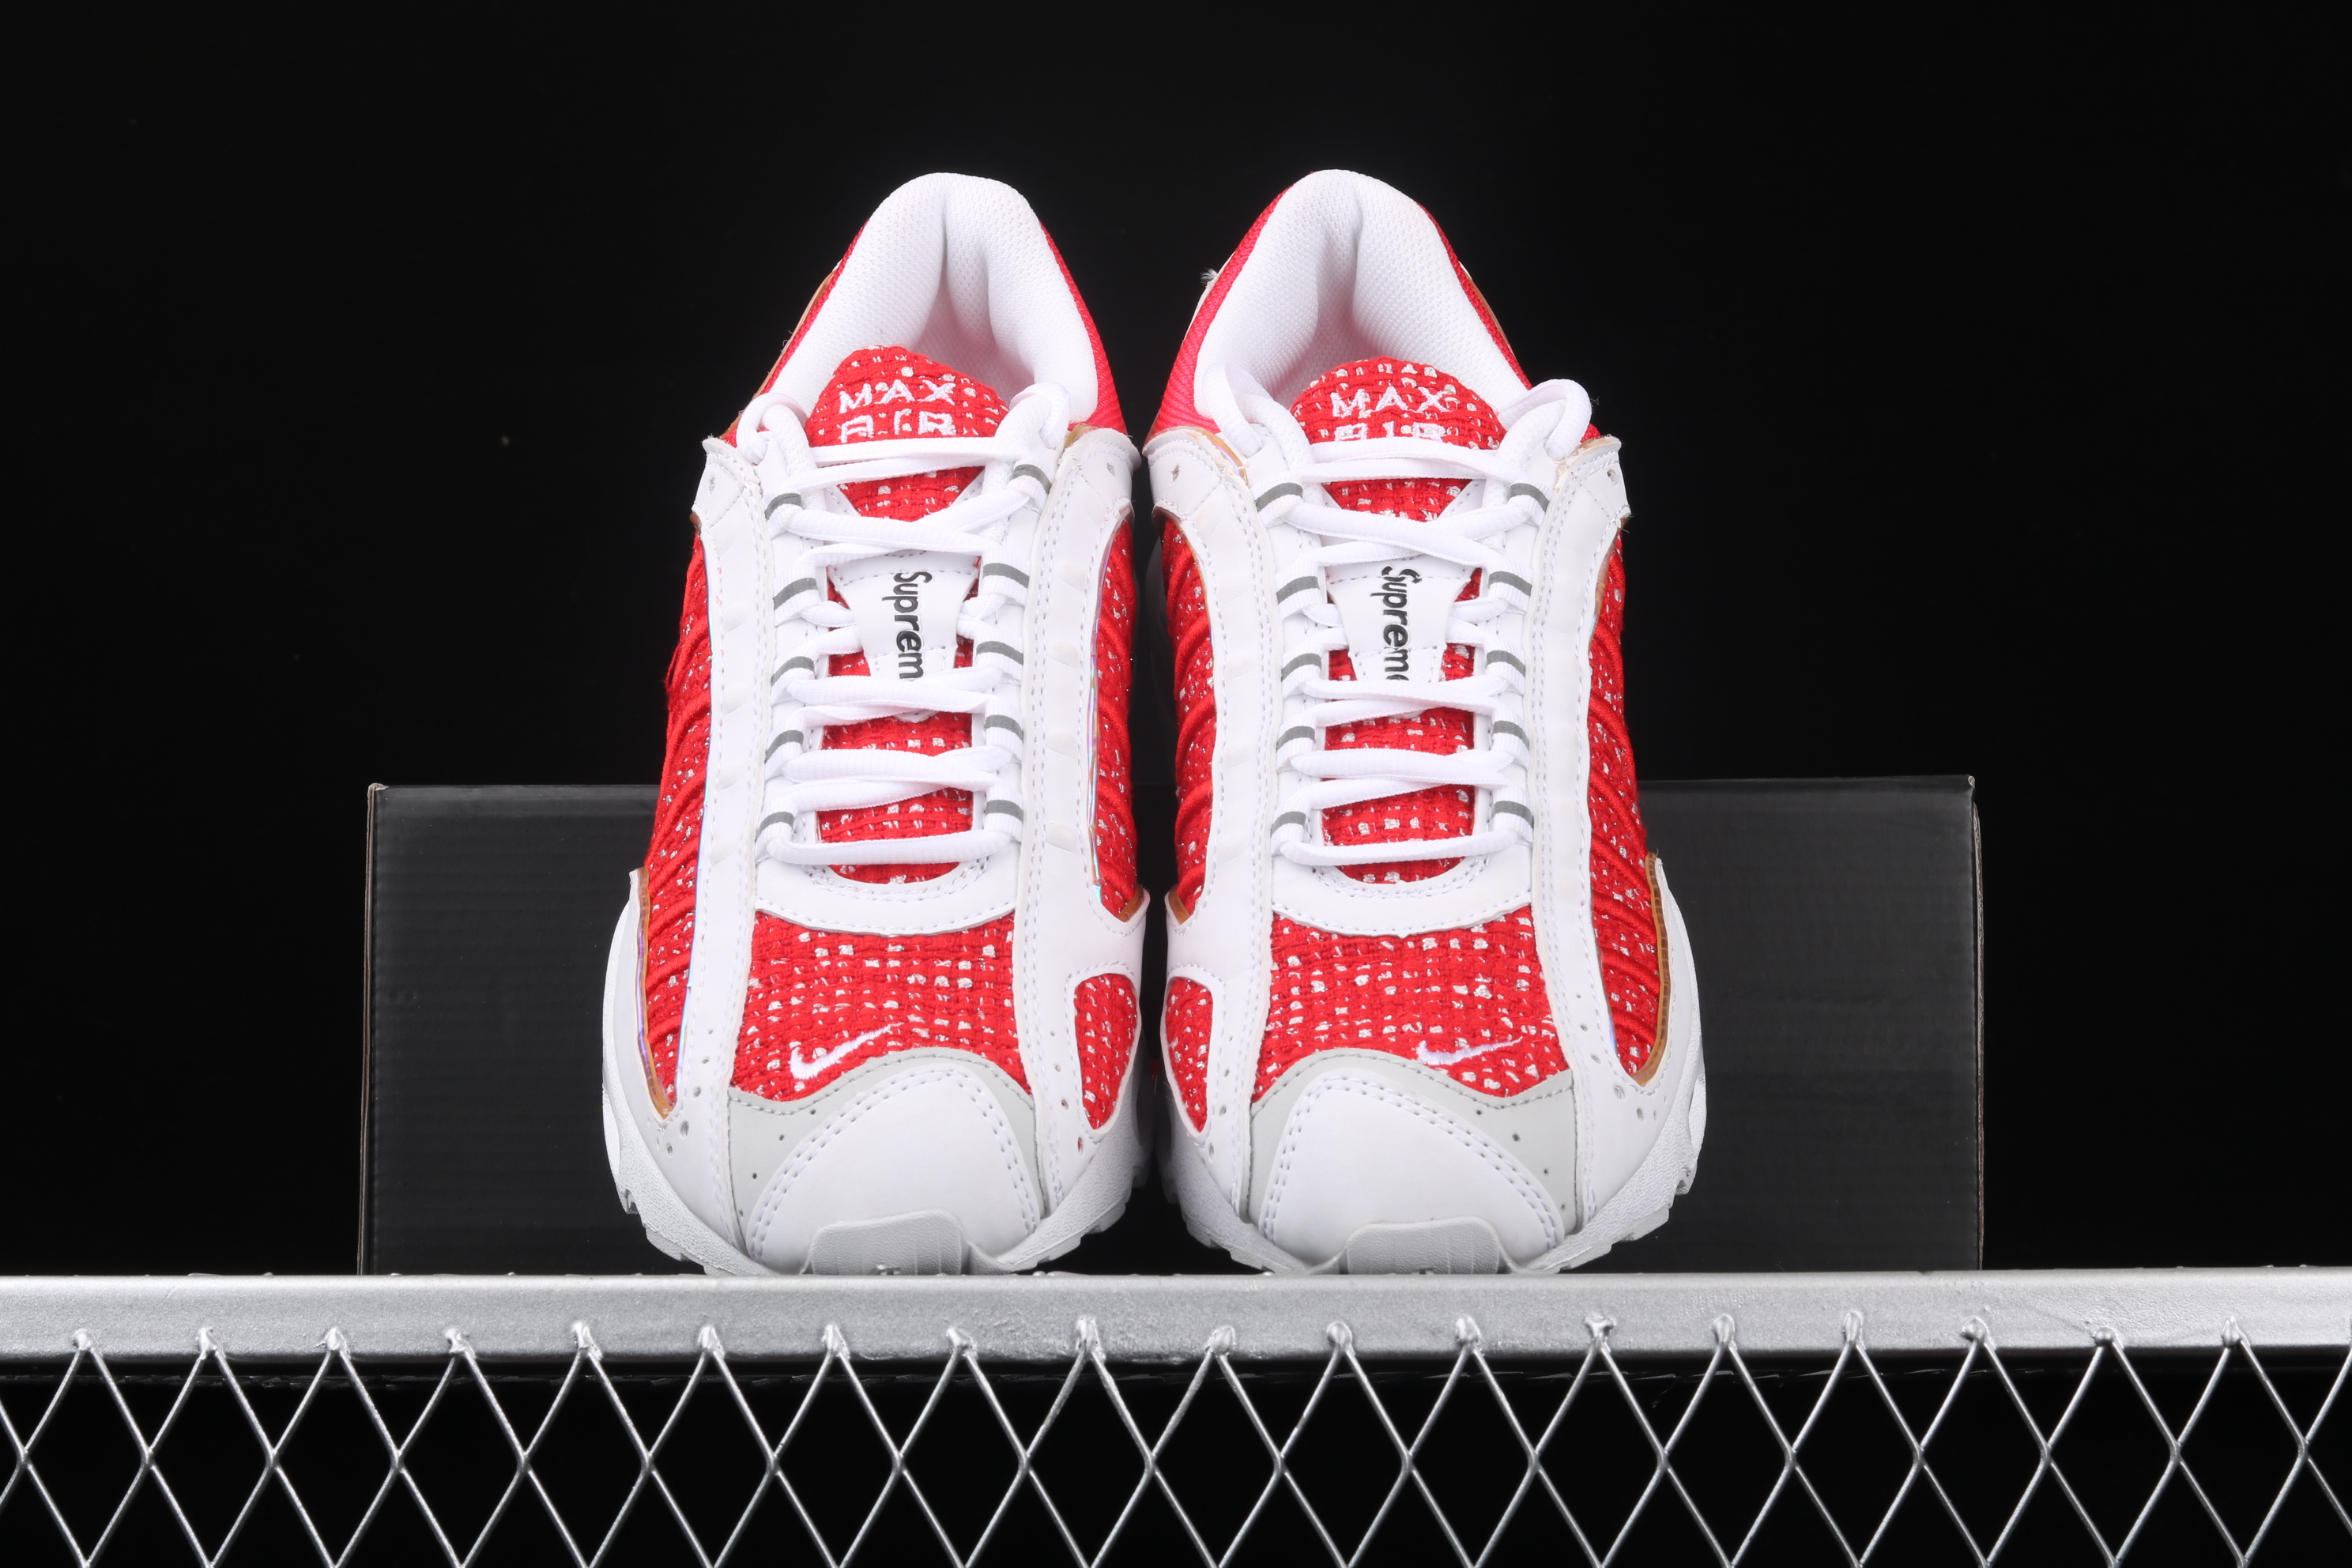 New Men Nike Air Max PLUS TXT White Red Running Shoes